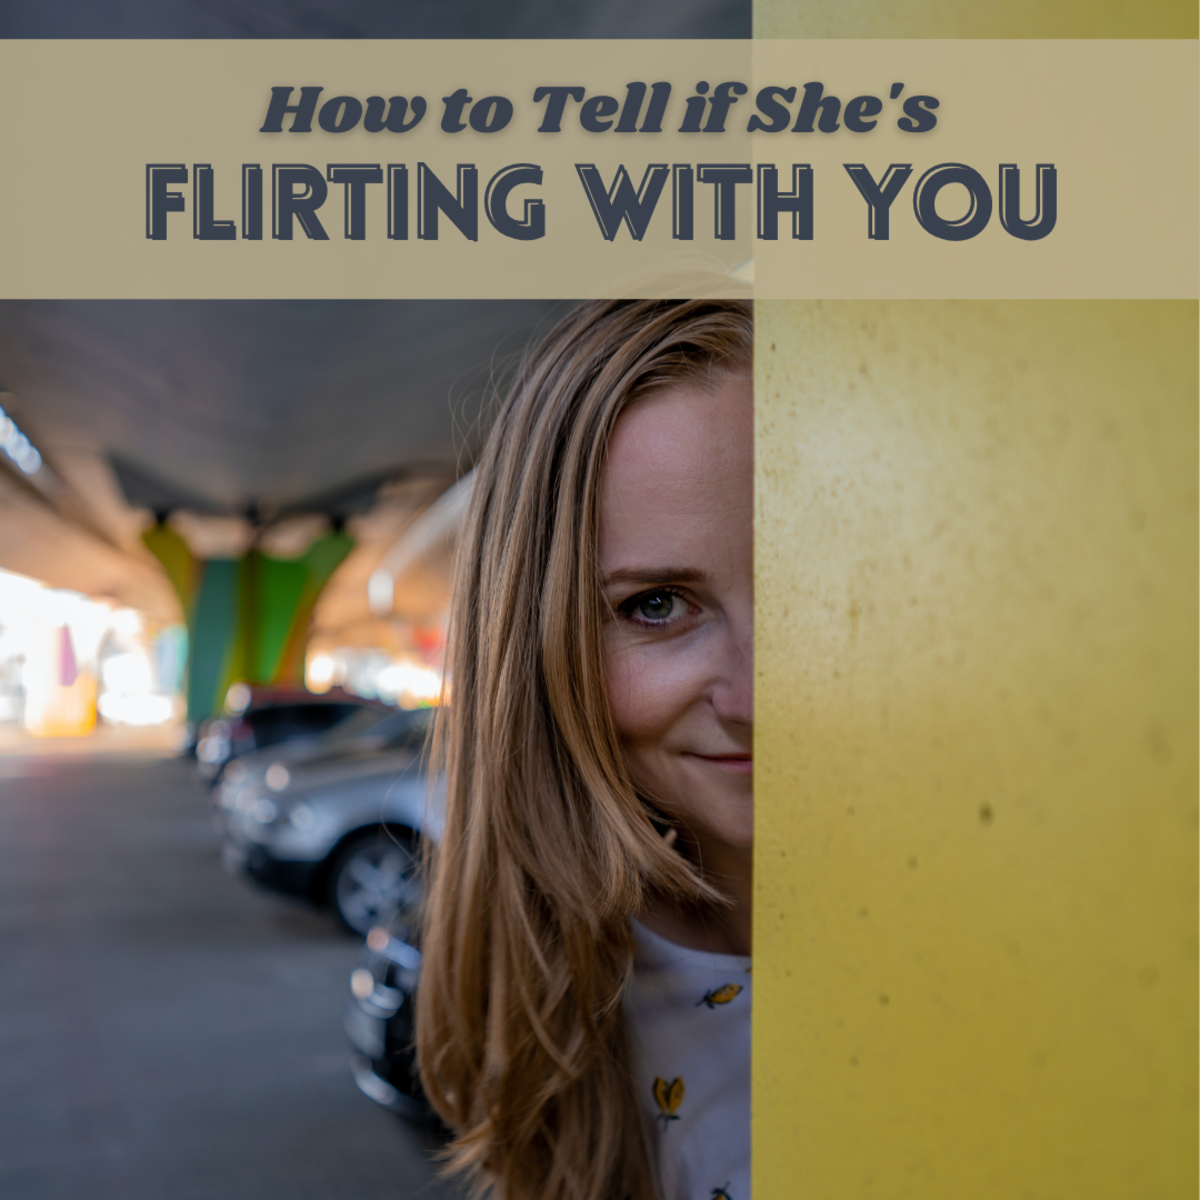 6 Signs That a Woman Is Flirting